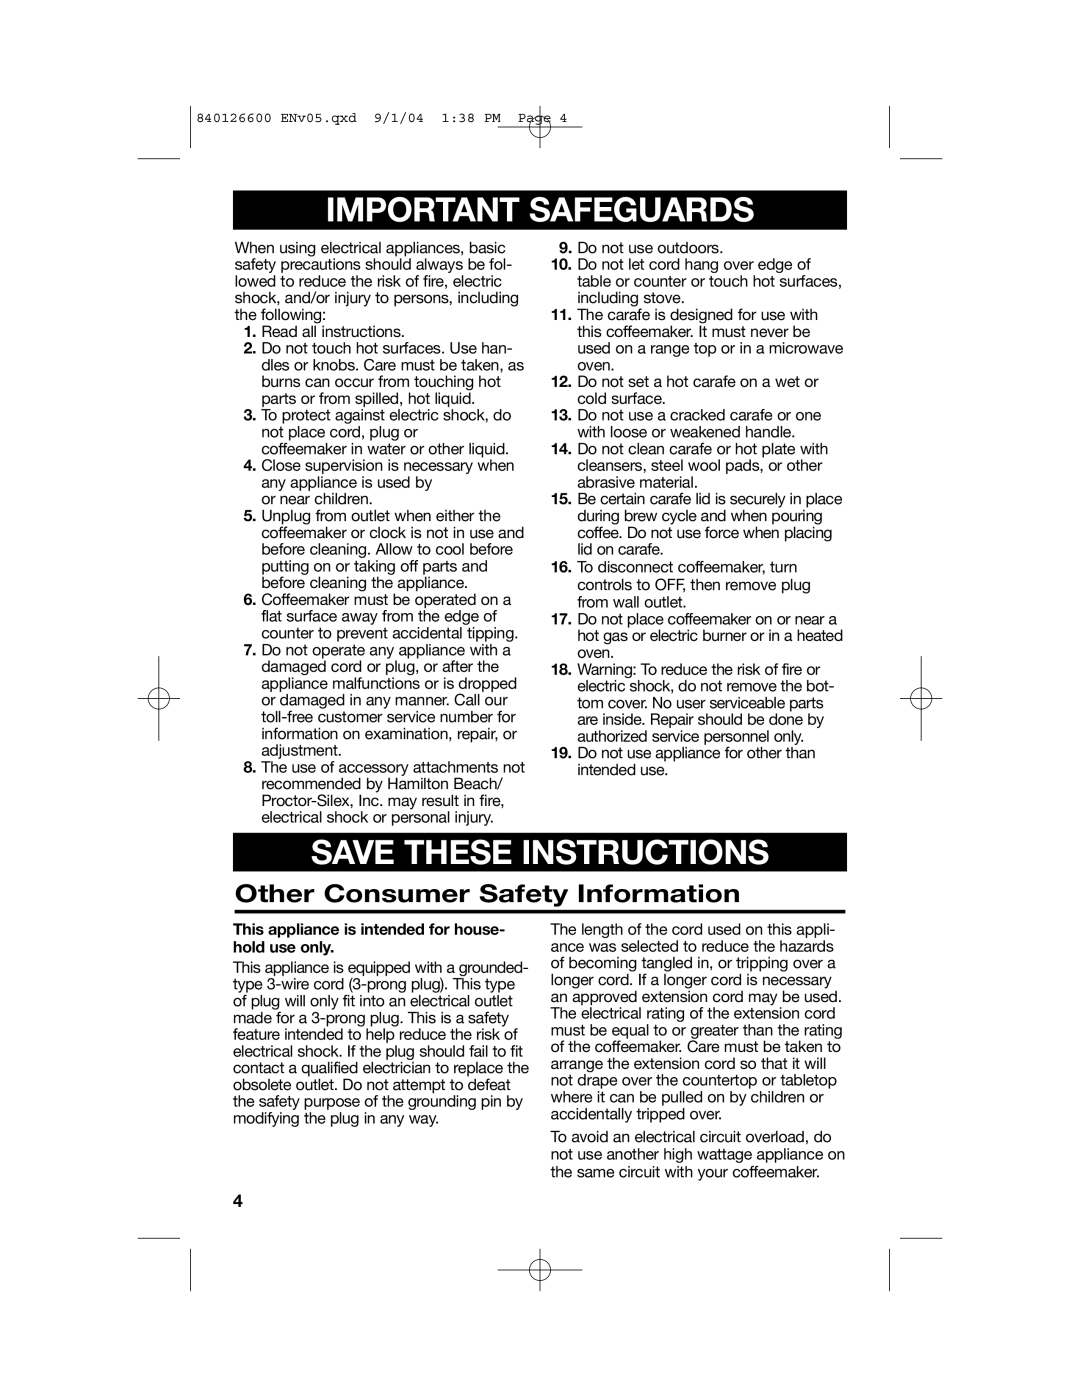 Hamilton Beach 80674 manual Other Consumer Safety Information, Important Safeguards, Save These Instructions 